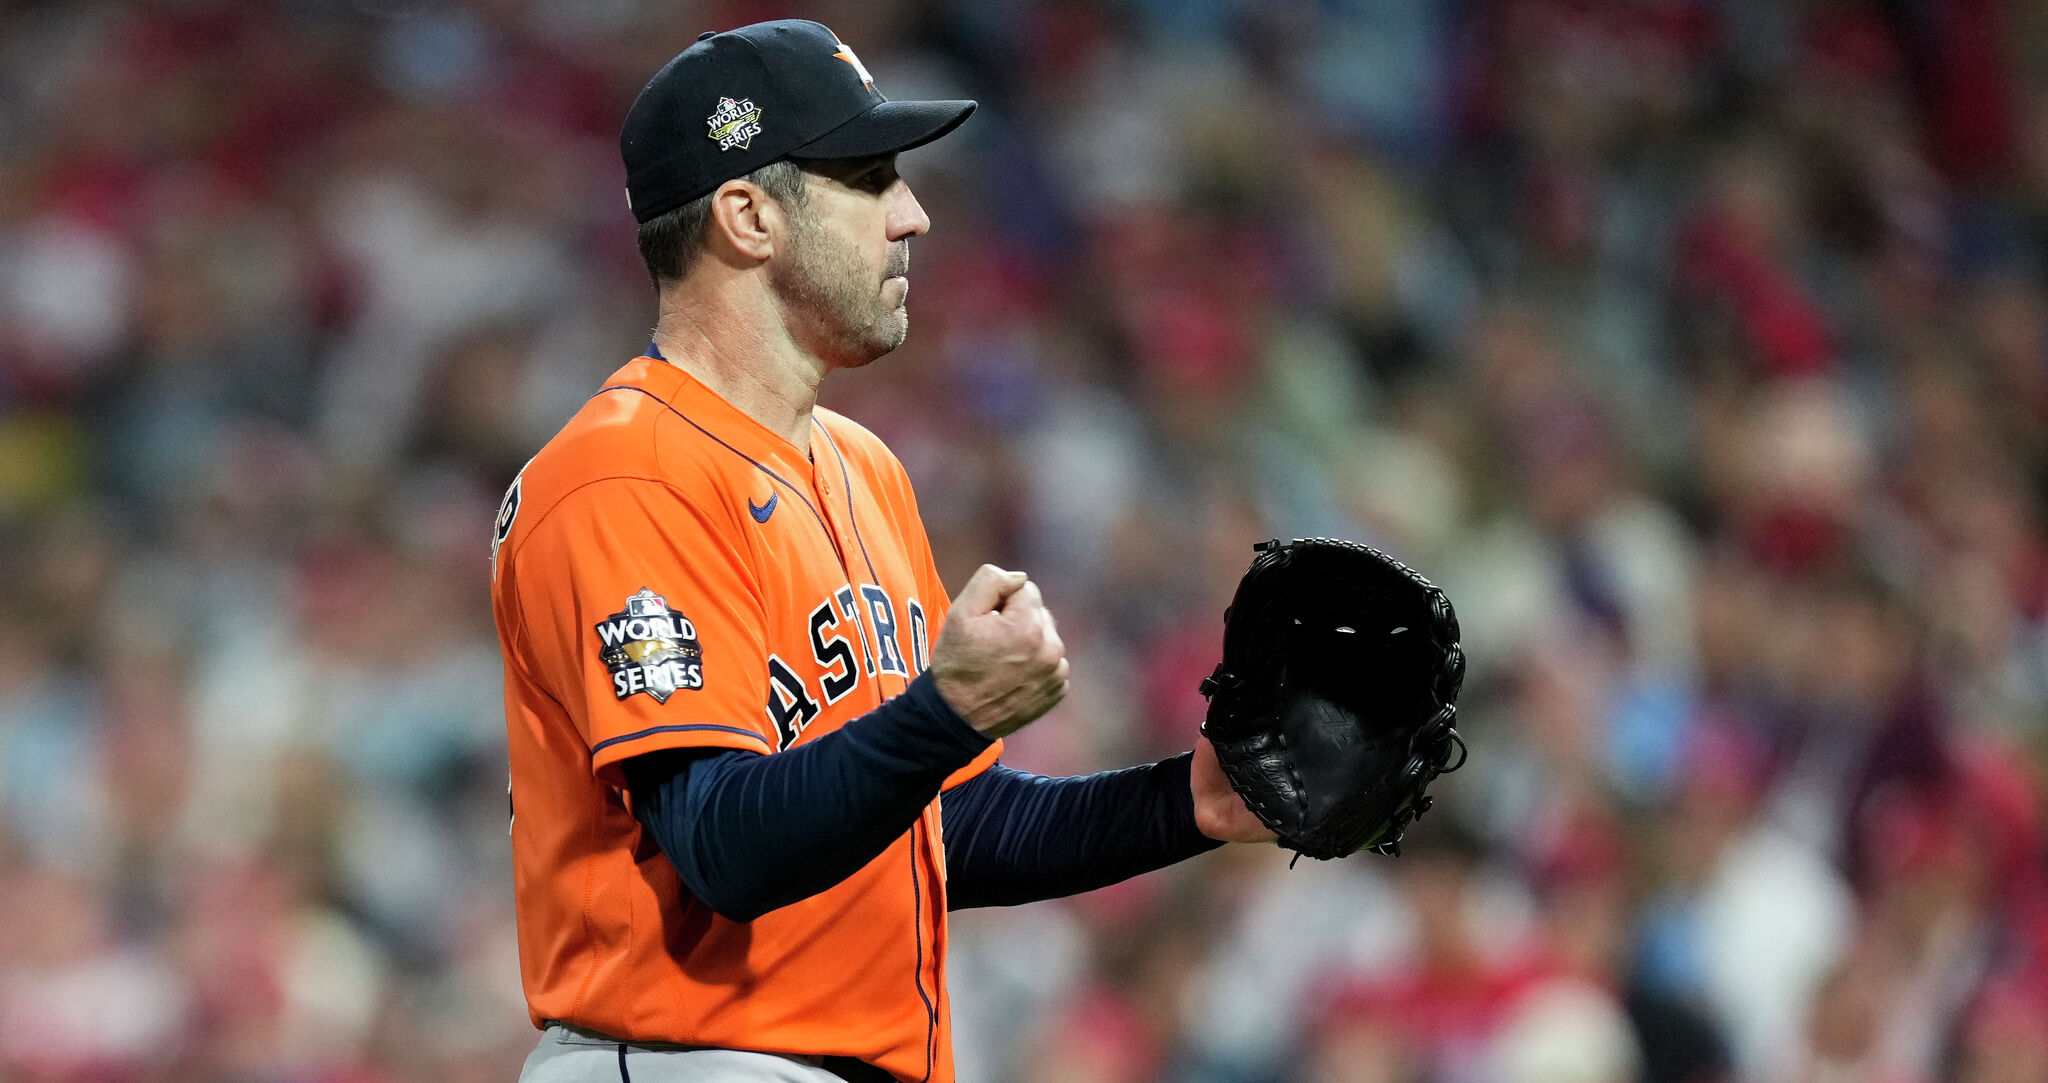 Justin Verlander jersey is perfect way to gear up for another